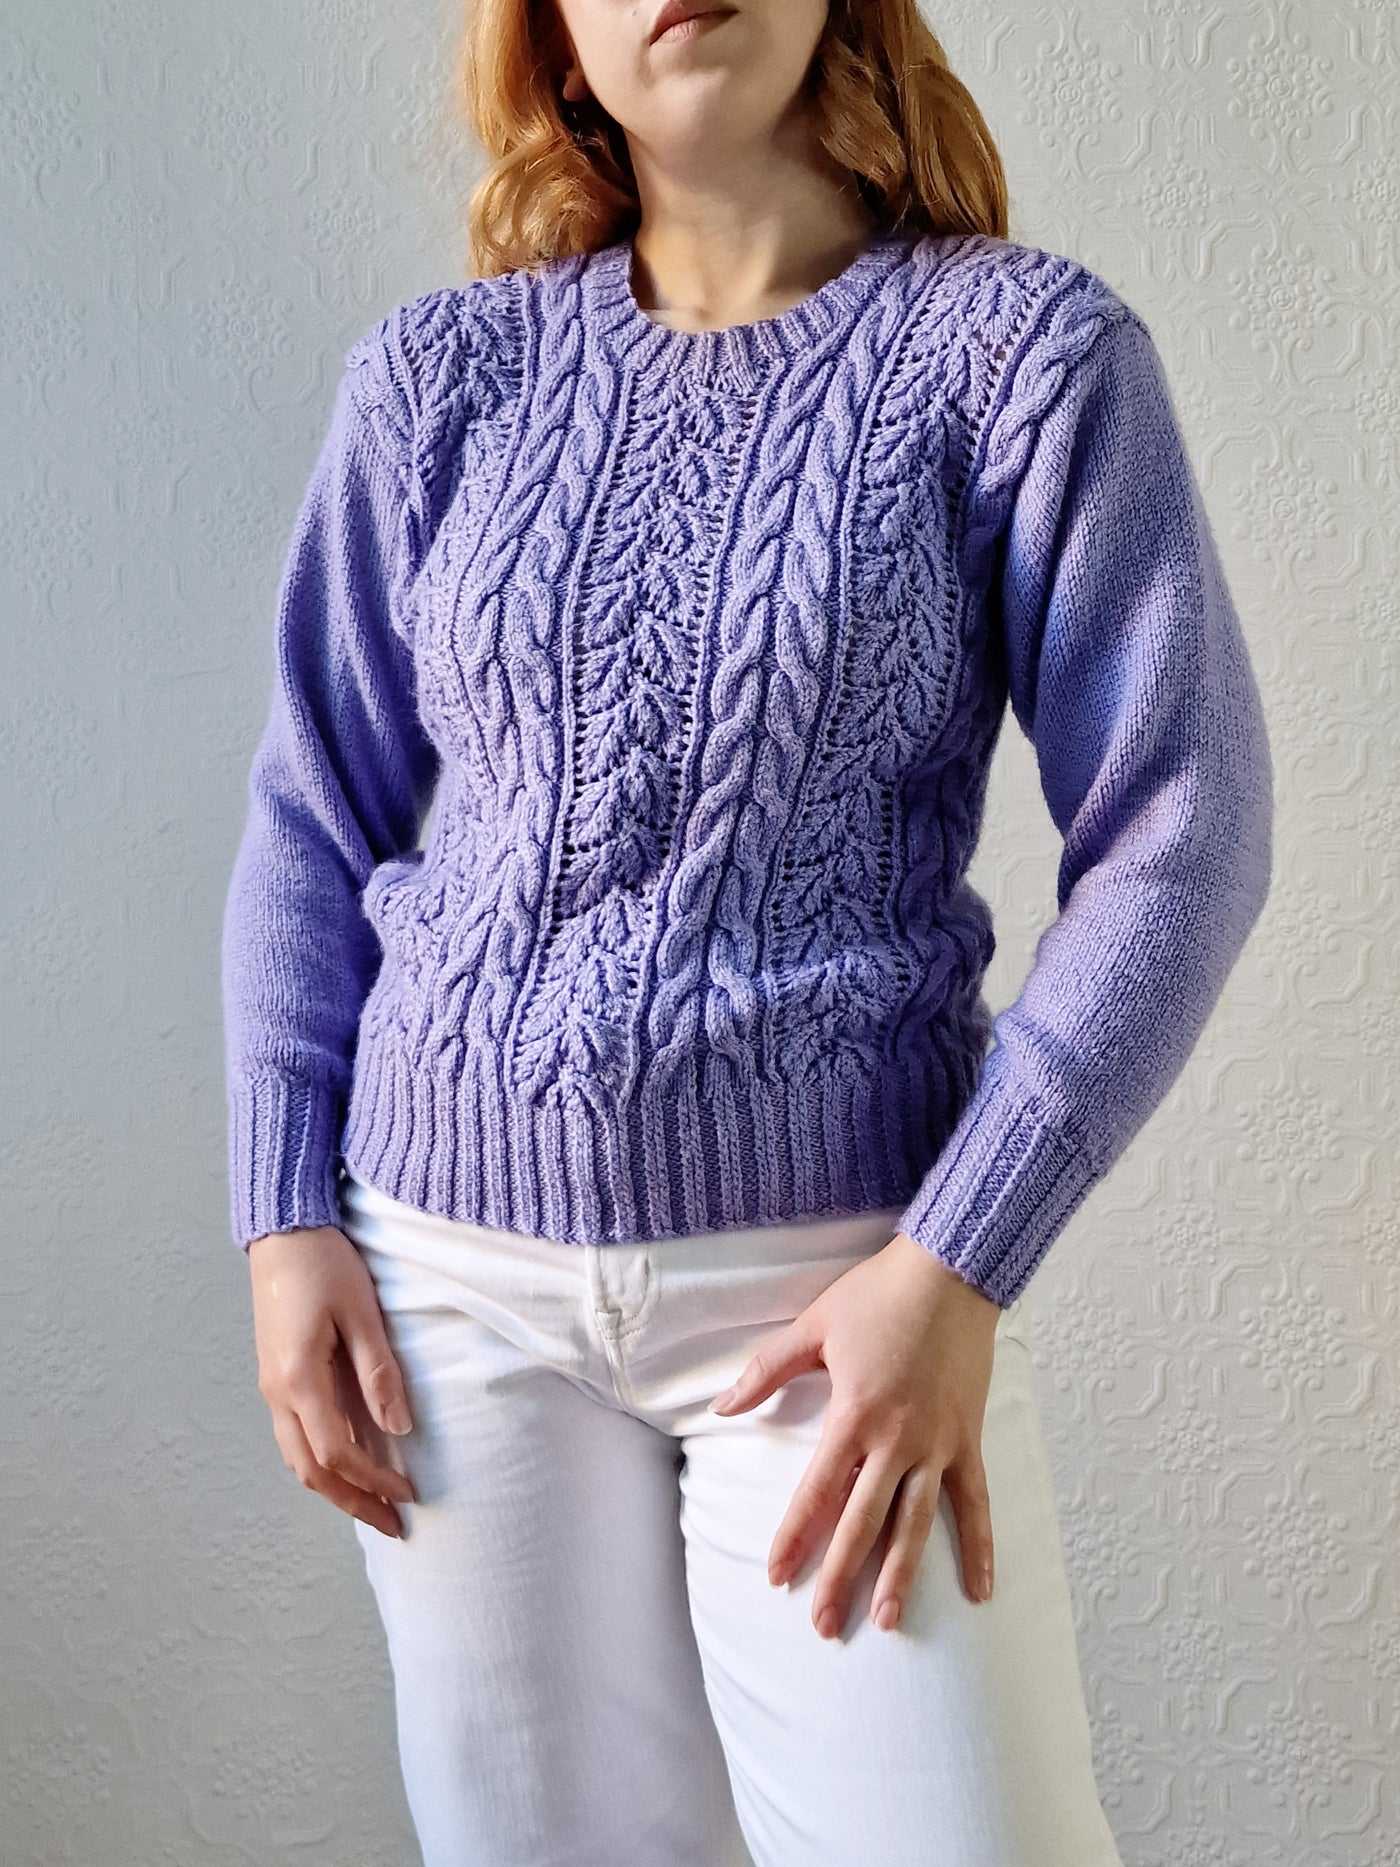 Vintage 80s Handknitted Lavender Purple Cable Knit Jumper with Crew Neck - S/M